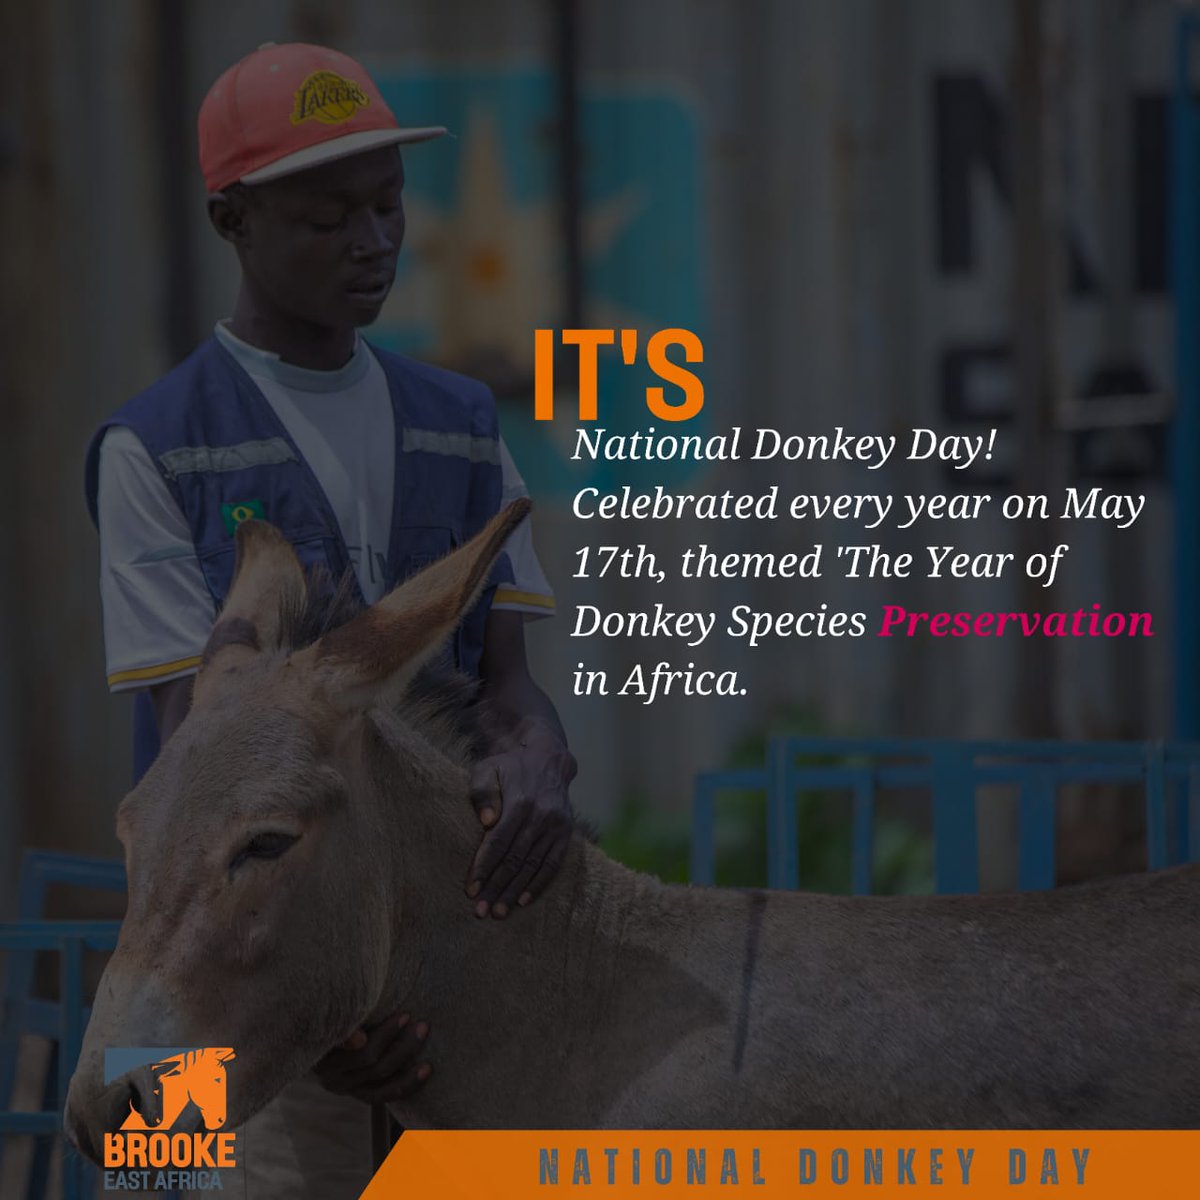 Today we celebrate the year of the Donkey species preservation in Africa. We must make that a reality. #NationalDonkeyDay Speak For Donkeys @TheBrookeEA @TheBrooke